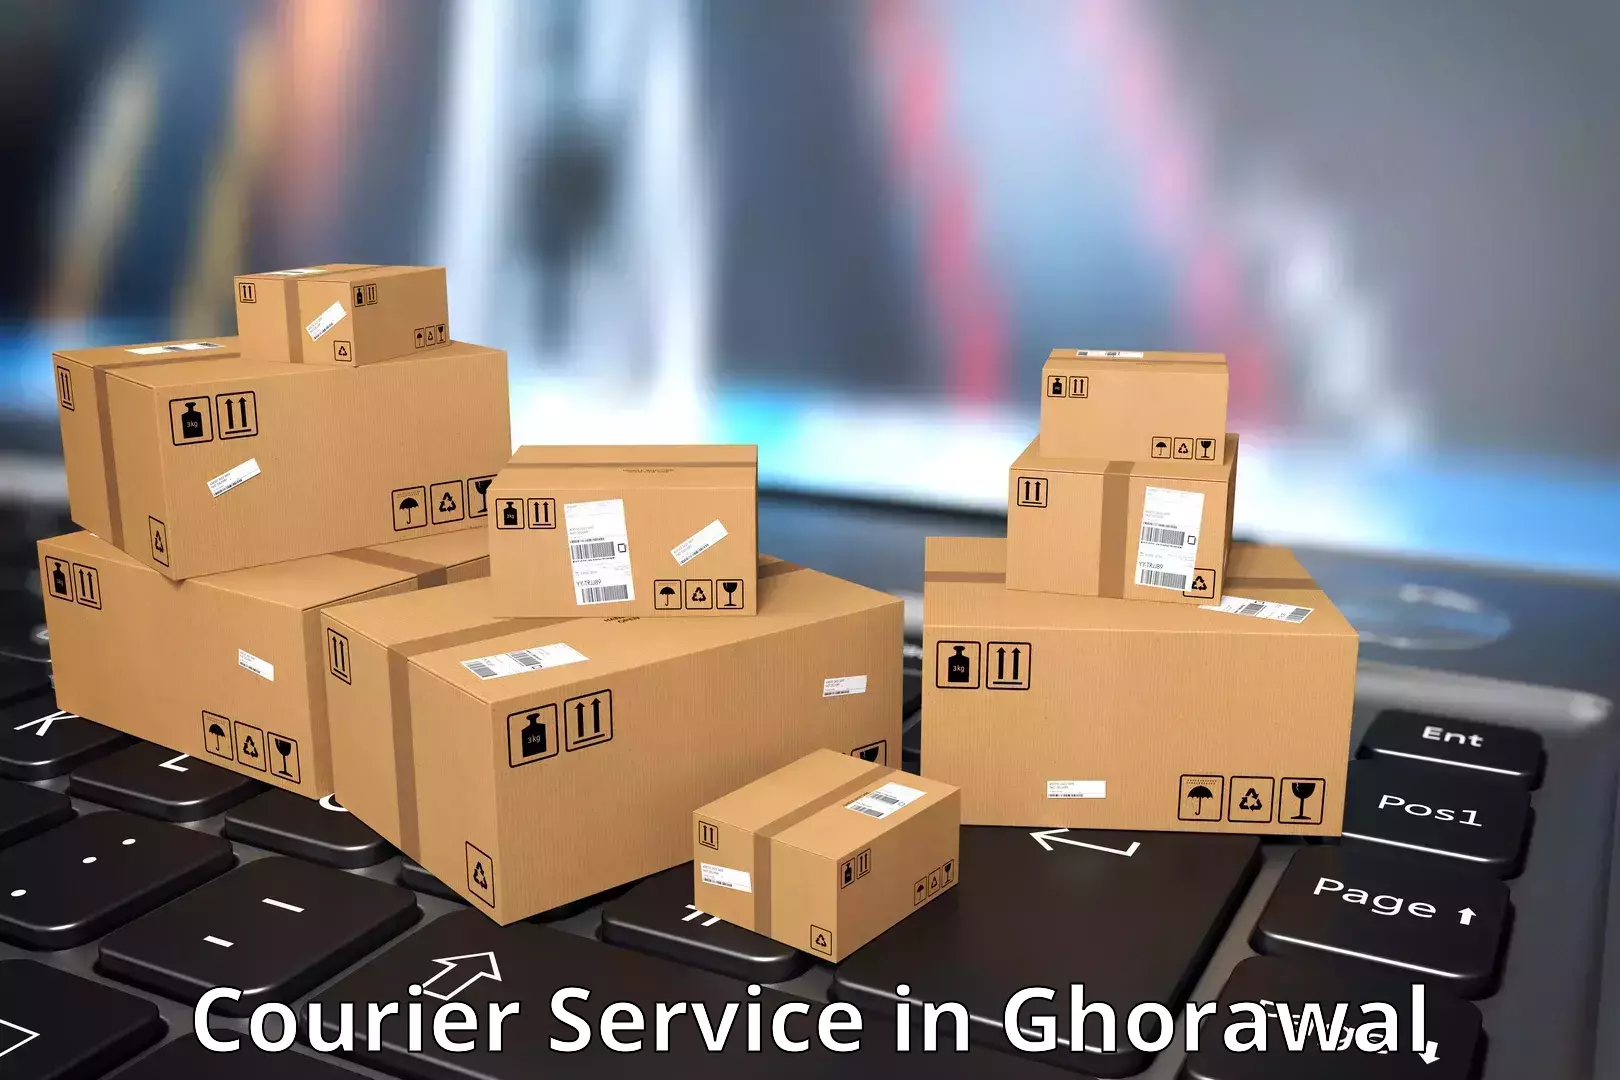 Advanced shipping services in Ghorawal